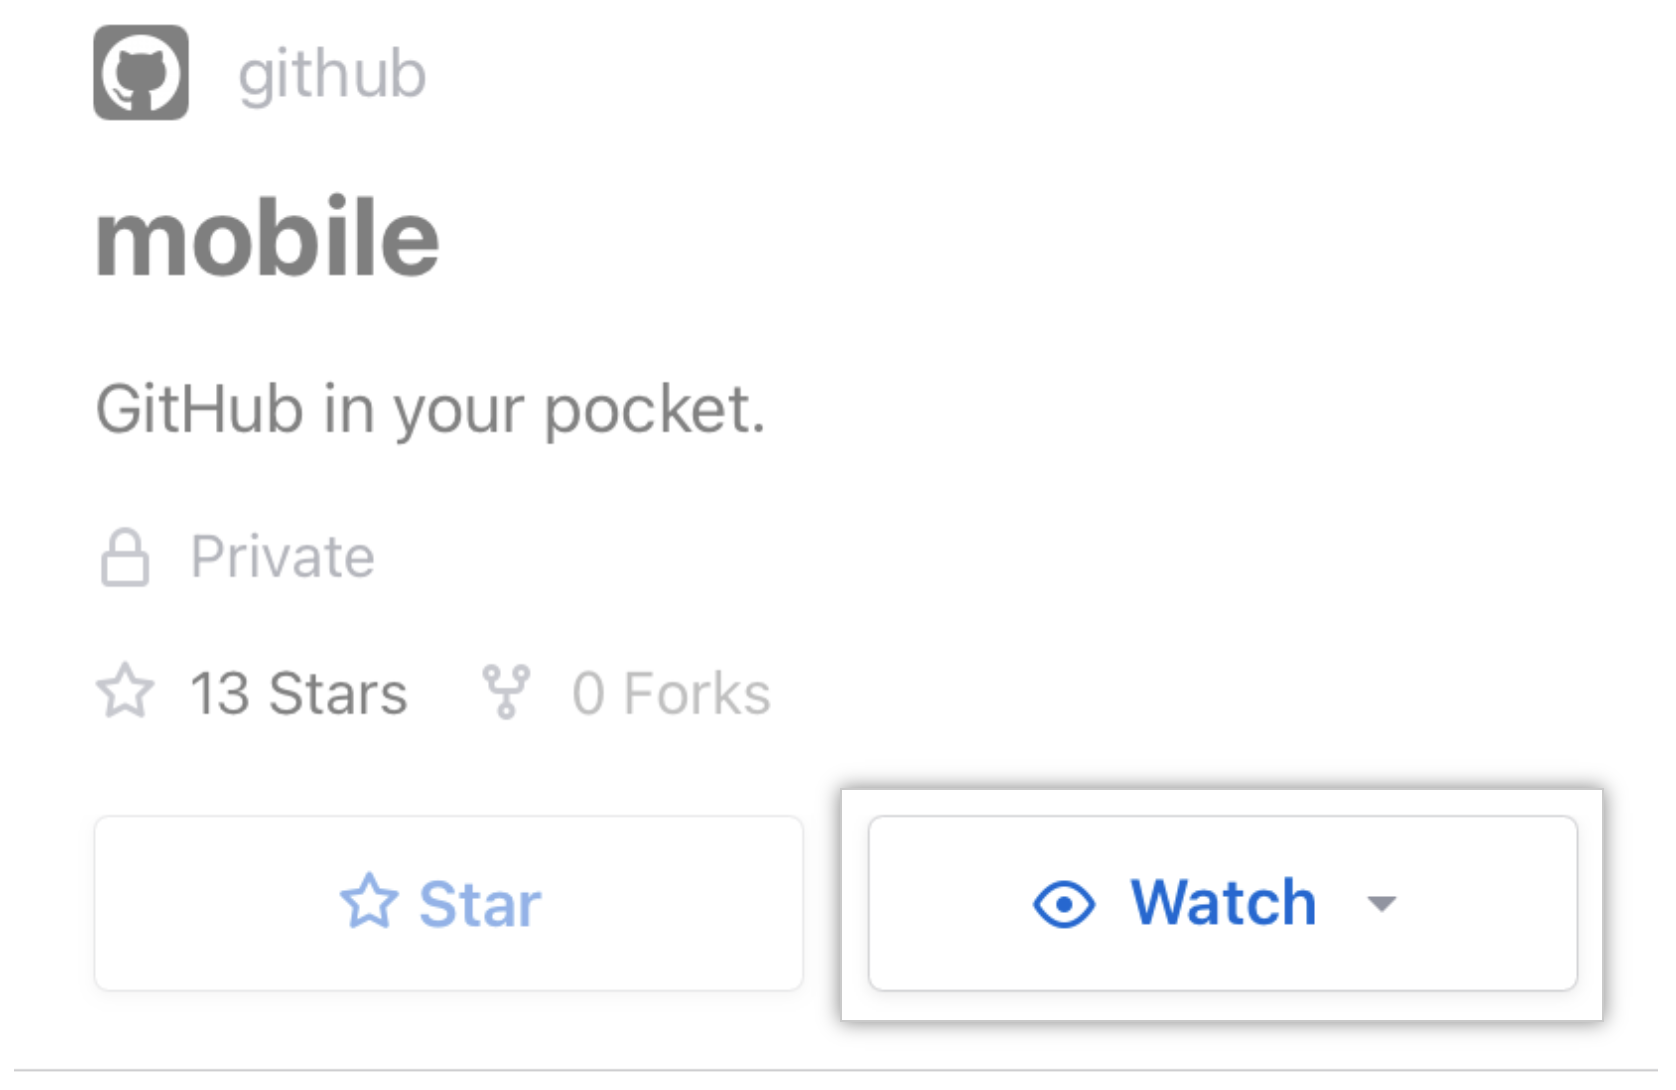 The watch button on GitHub Móvil